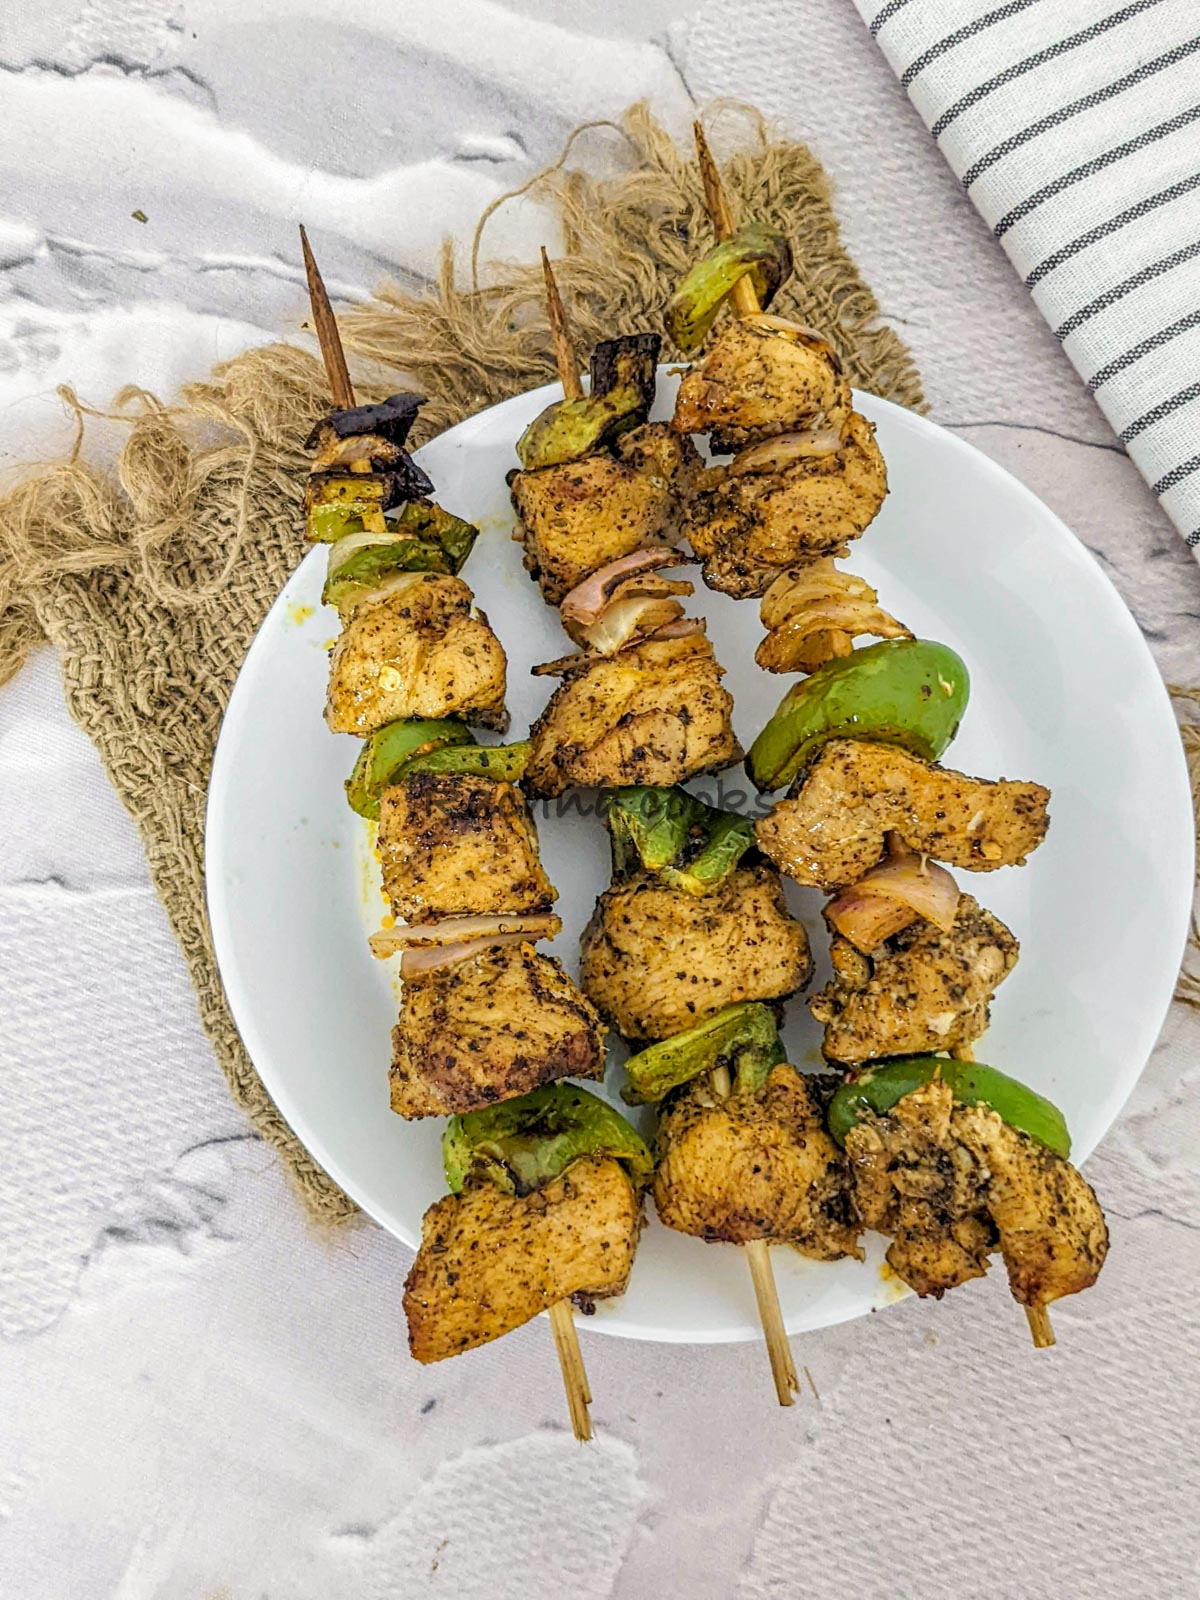 3 skewers of chicken kabob after air frying in a white plate.